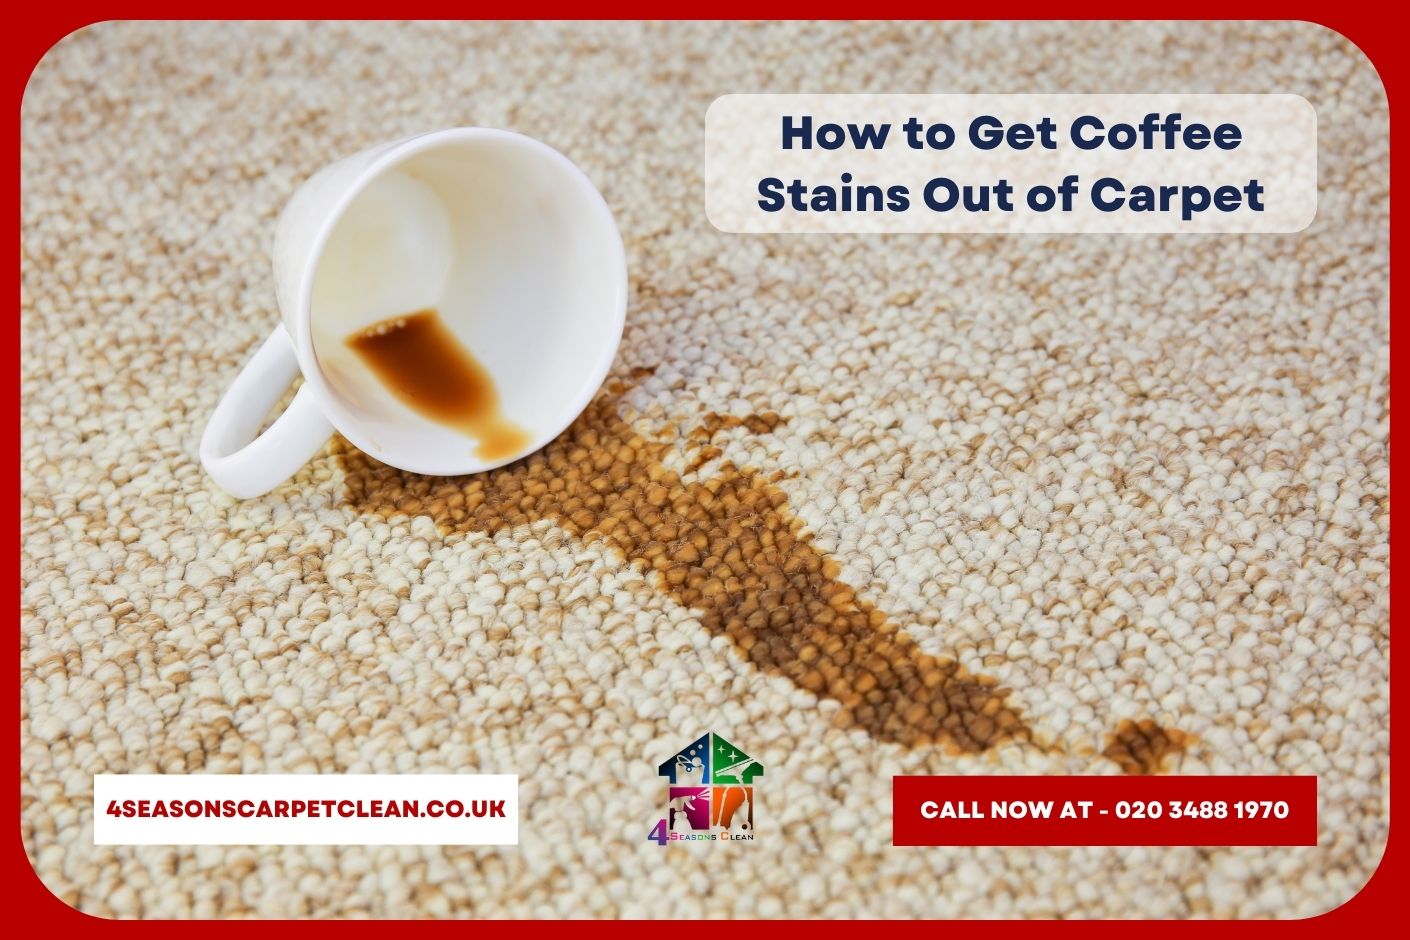 Spilled coffee, wine, cup of tea or any kind of drink on your carpet?